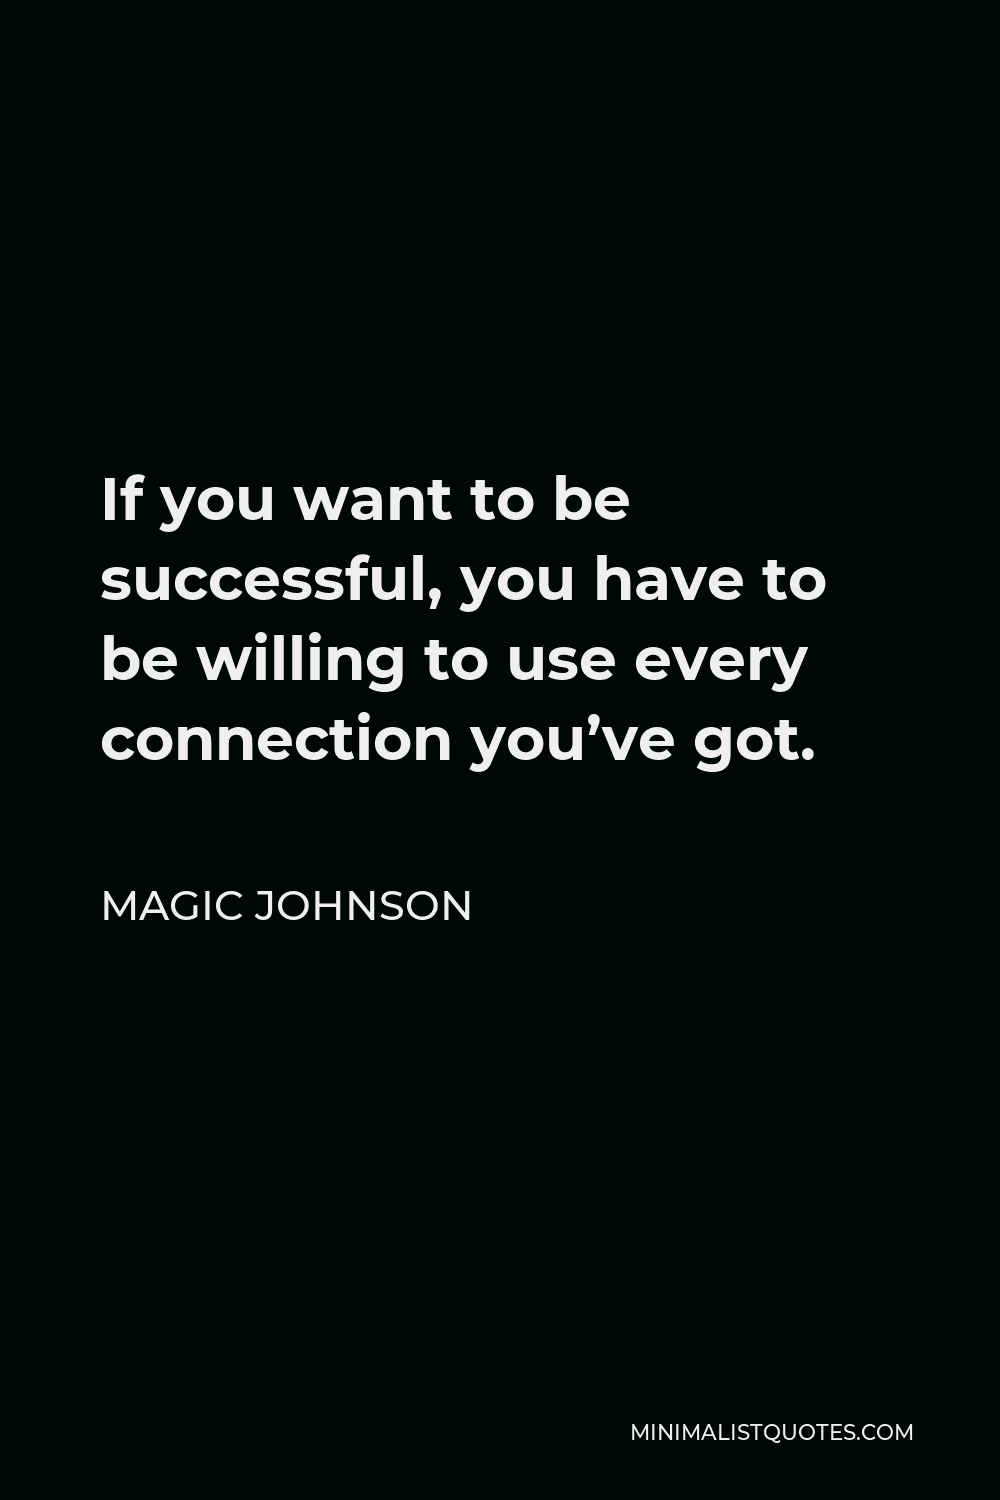 Magic Johnson Quote - If you want to be successful, you have to be willing to use every connection you’ve got.